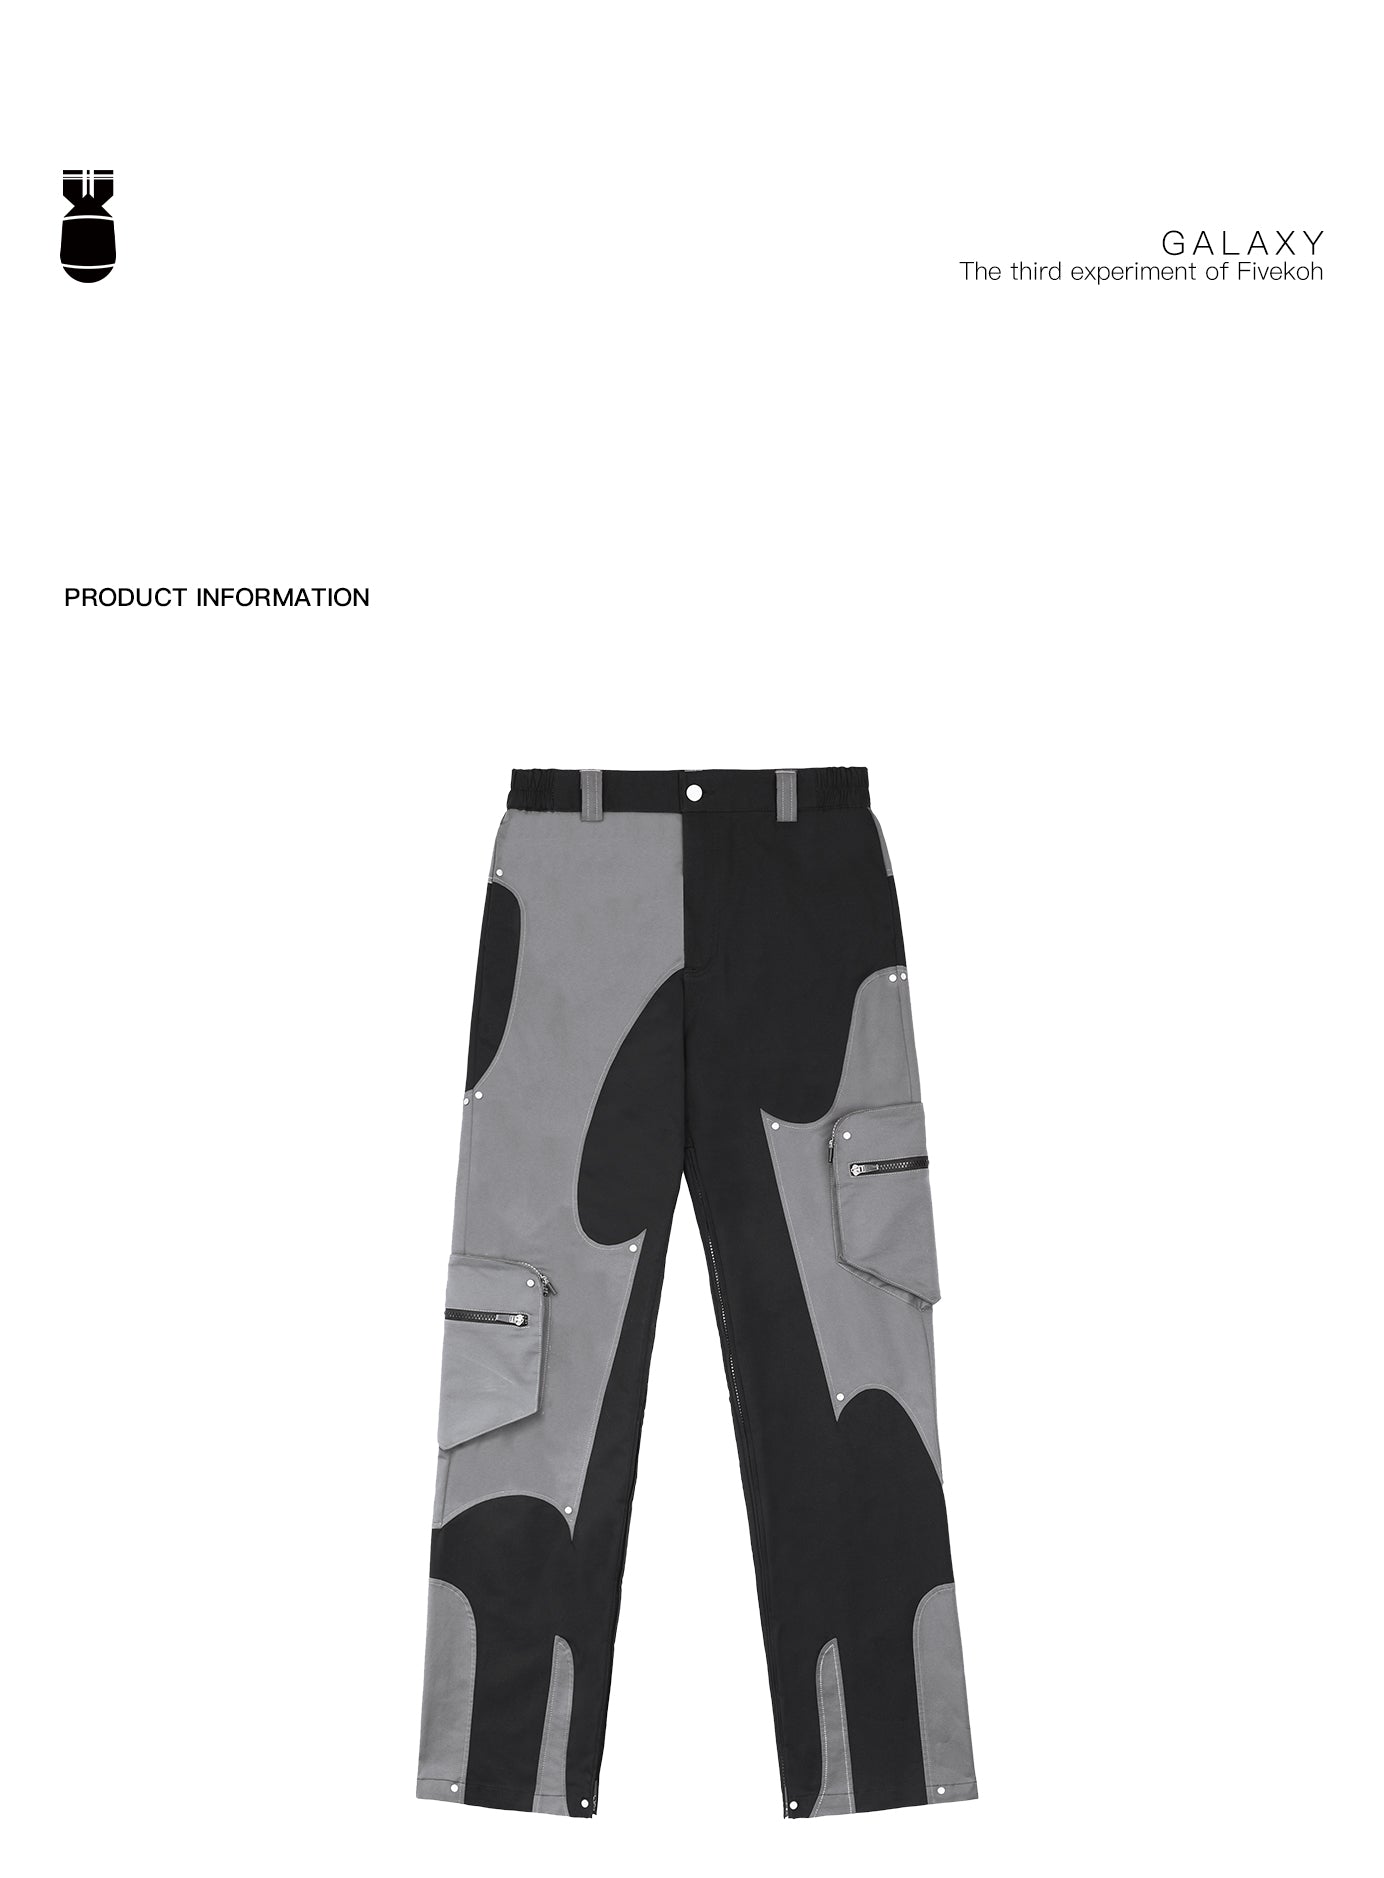 wikiwand NX-74205 concept casual trousers